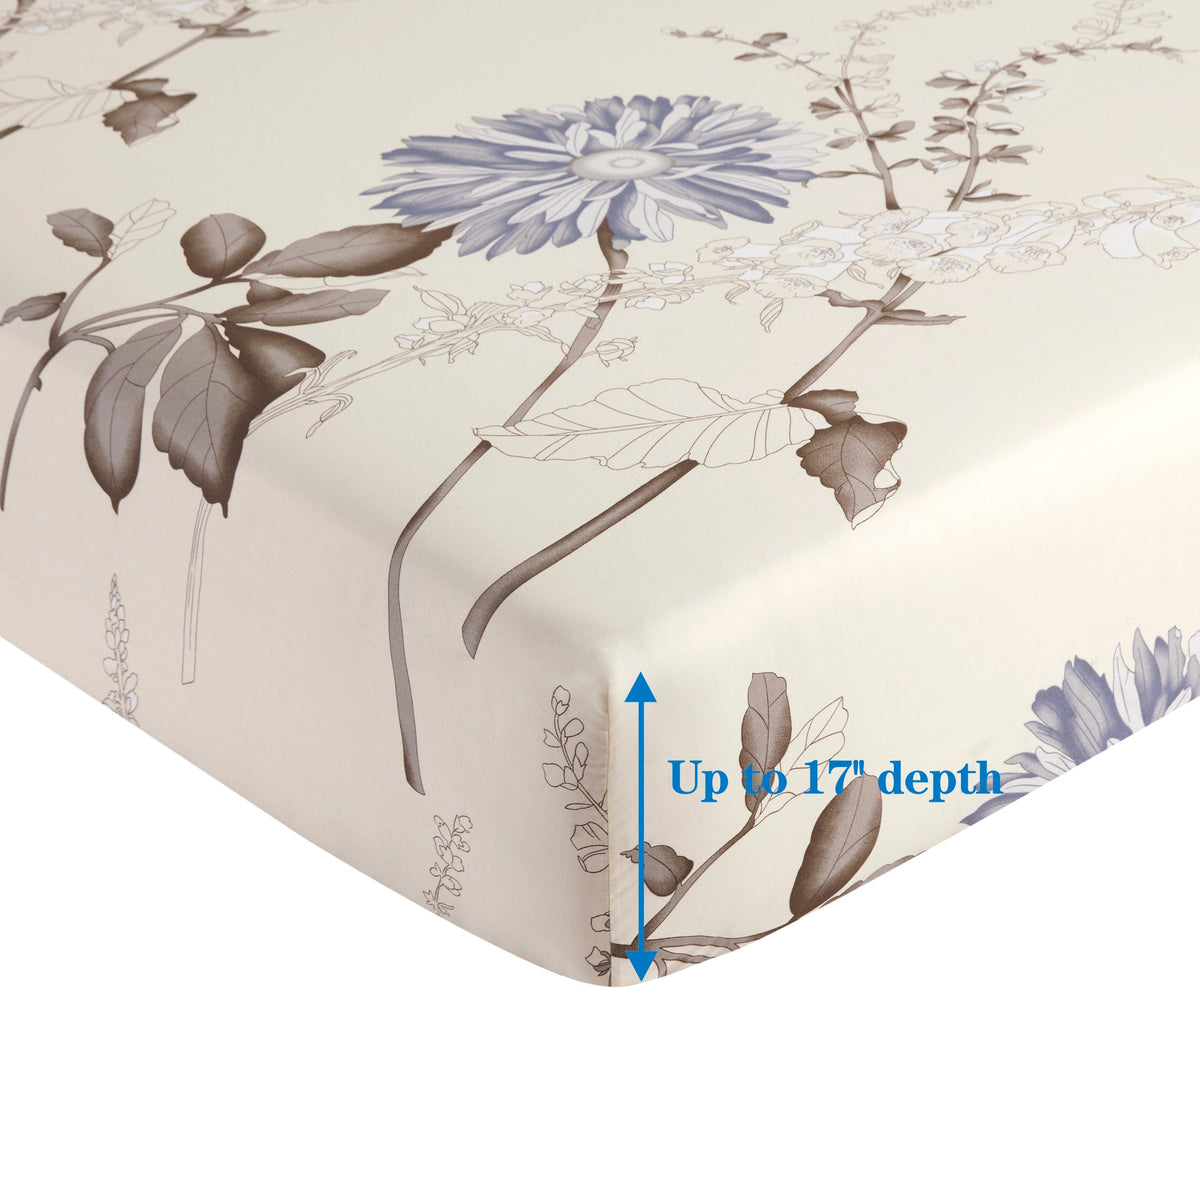 Soft Silky Printed Rayon from Bamboo All Season ,Duvet Cover Fitted Sheet Ensemble Bedding Set, Blue Chrysanthemum Floral Pattern